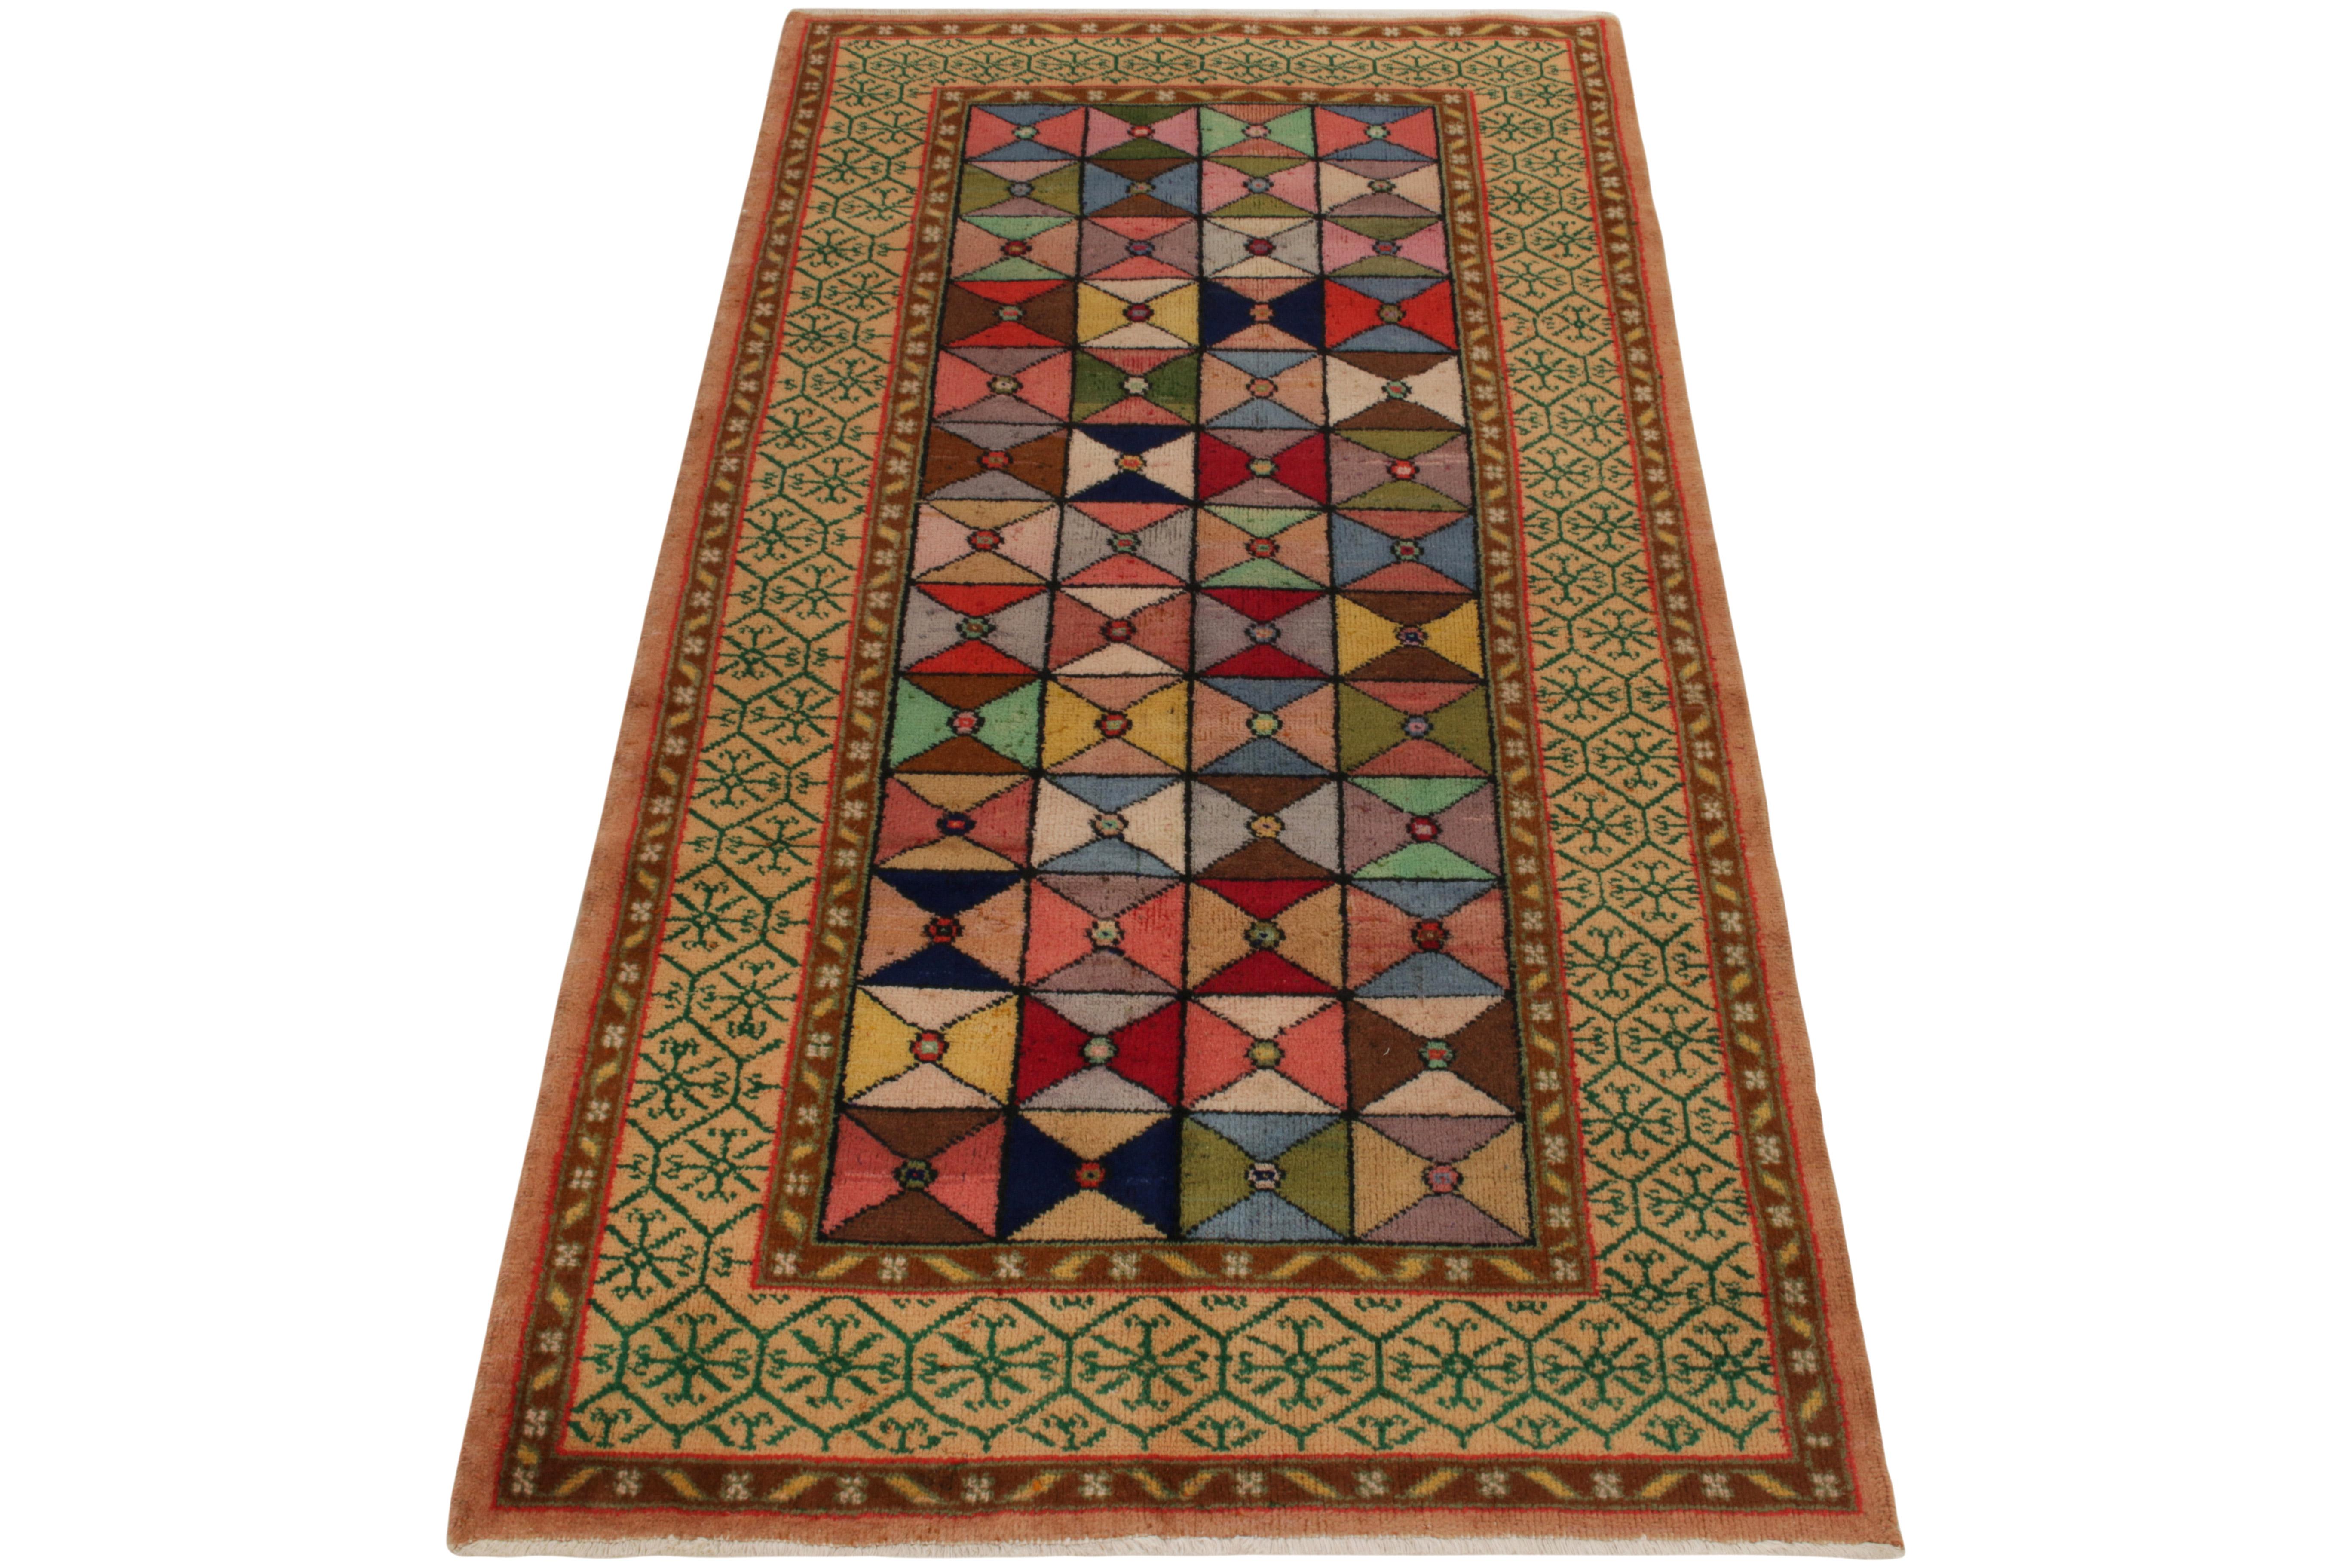 Hand-knotted in wool, a 4x7 vintage rug from a venerated multidisciplinary Turkish designer entering Rug & Kilim’s commemorative Mid-Century Pasha Collection. The one-of-a-kind Art Deco piece exemplifies this artist’s reinvention of the aesthetic